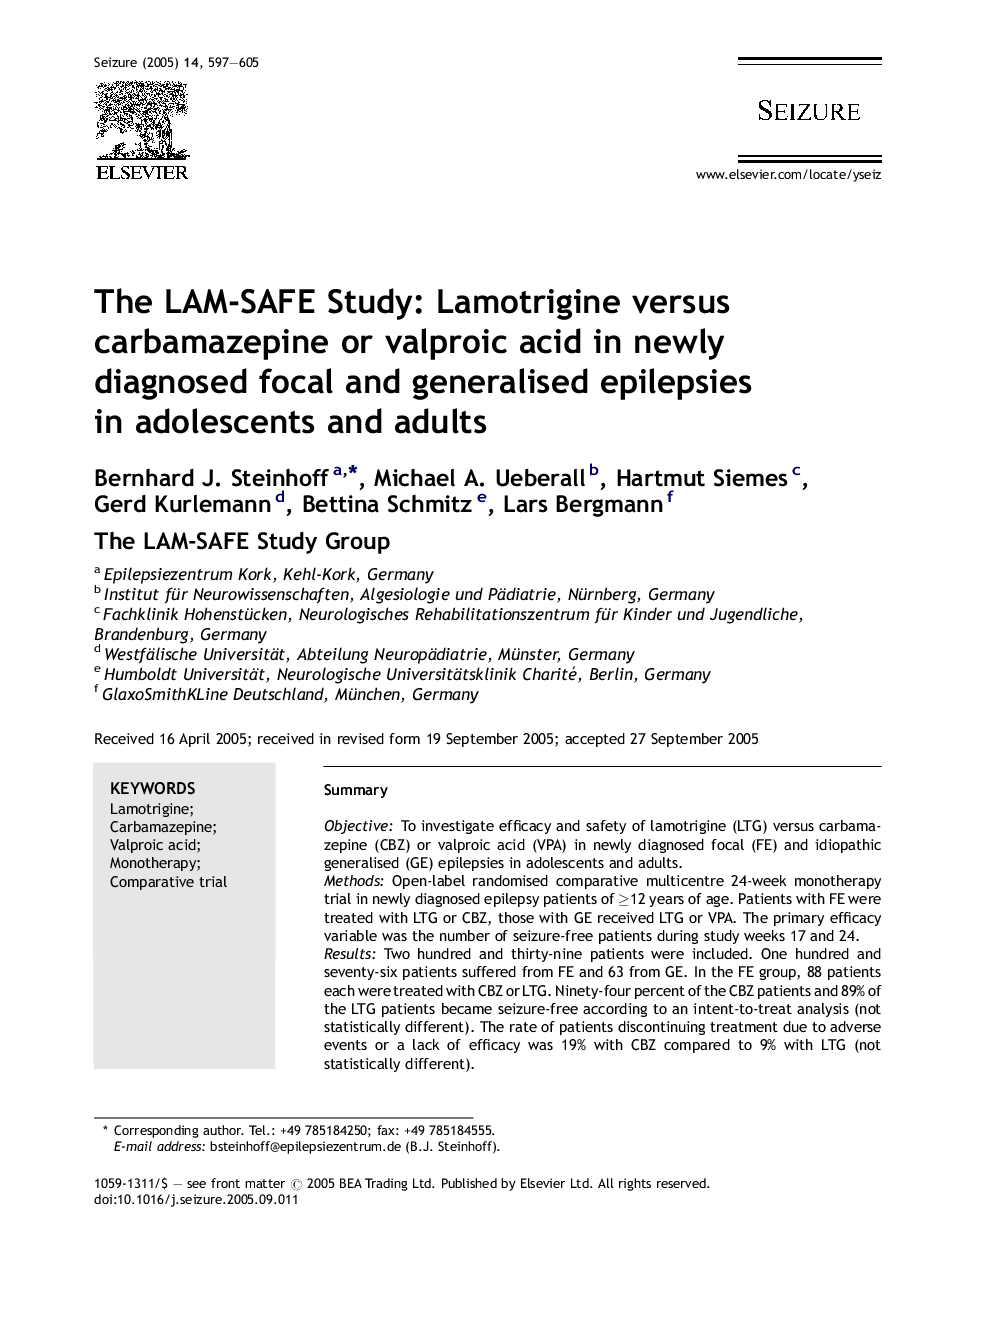 The LAM-SAFE Study: Lamotrigine versus carbamazepine or valproic acid in newly diagnosed focal and generalised epilepsies in adolescents and adults